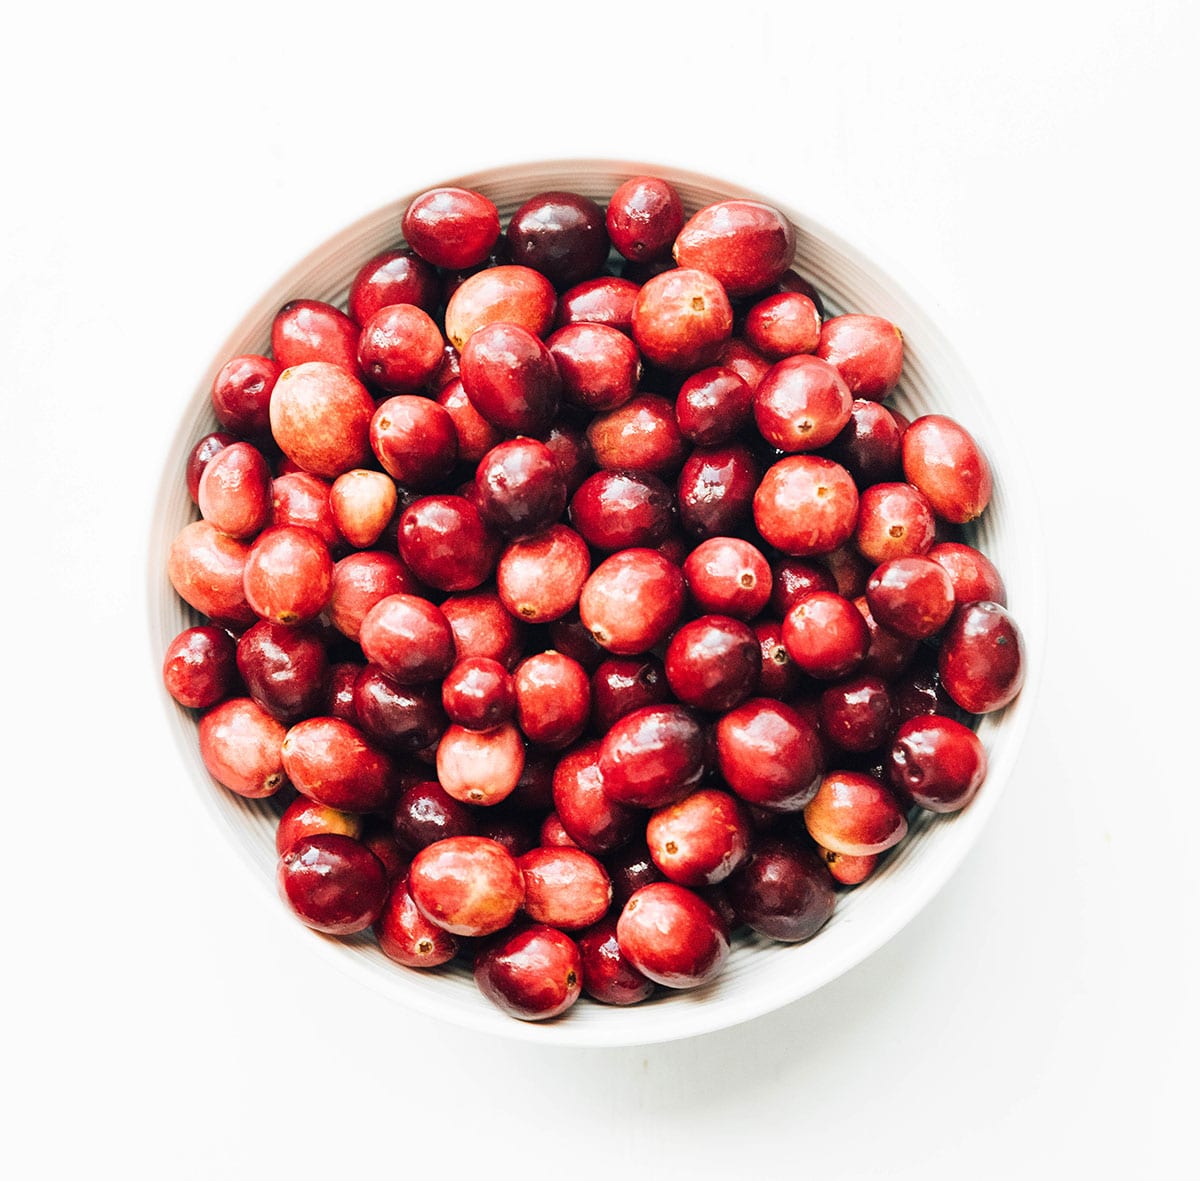 A white bowl filled with cranberries and placed on a white background